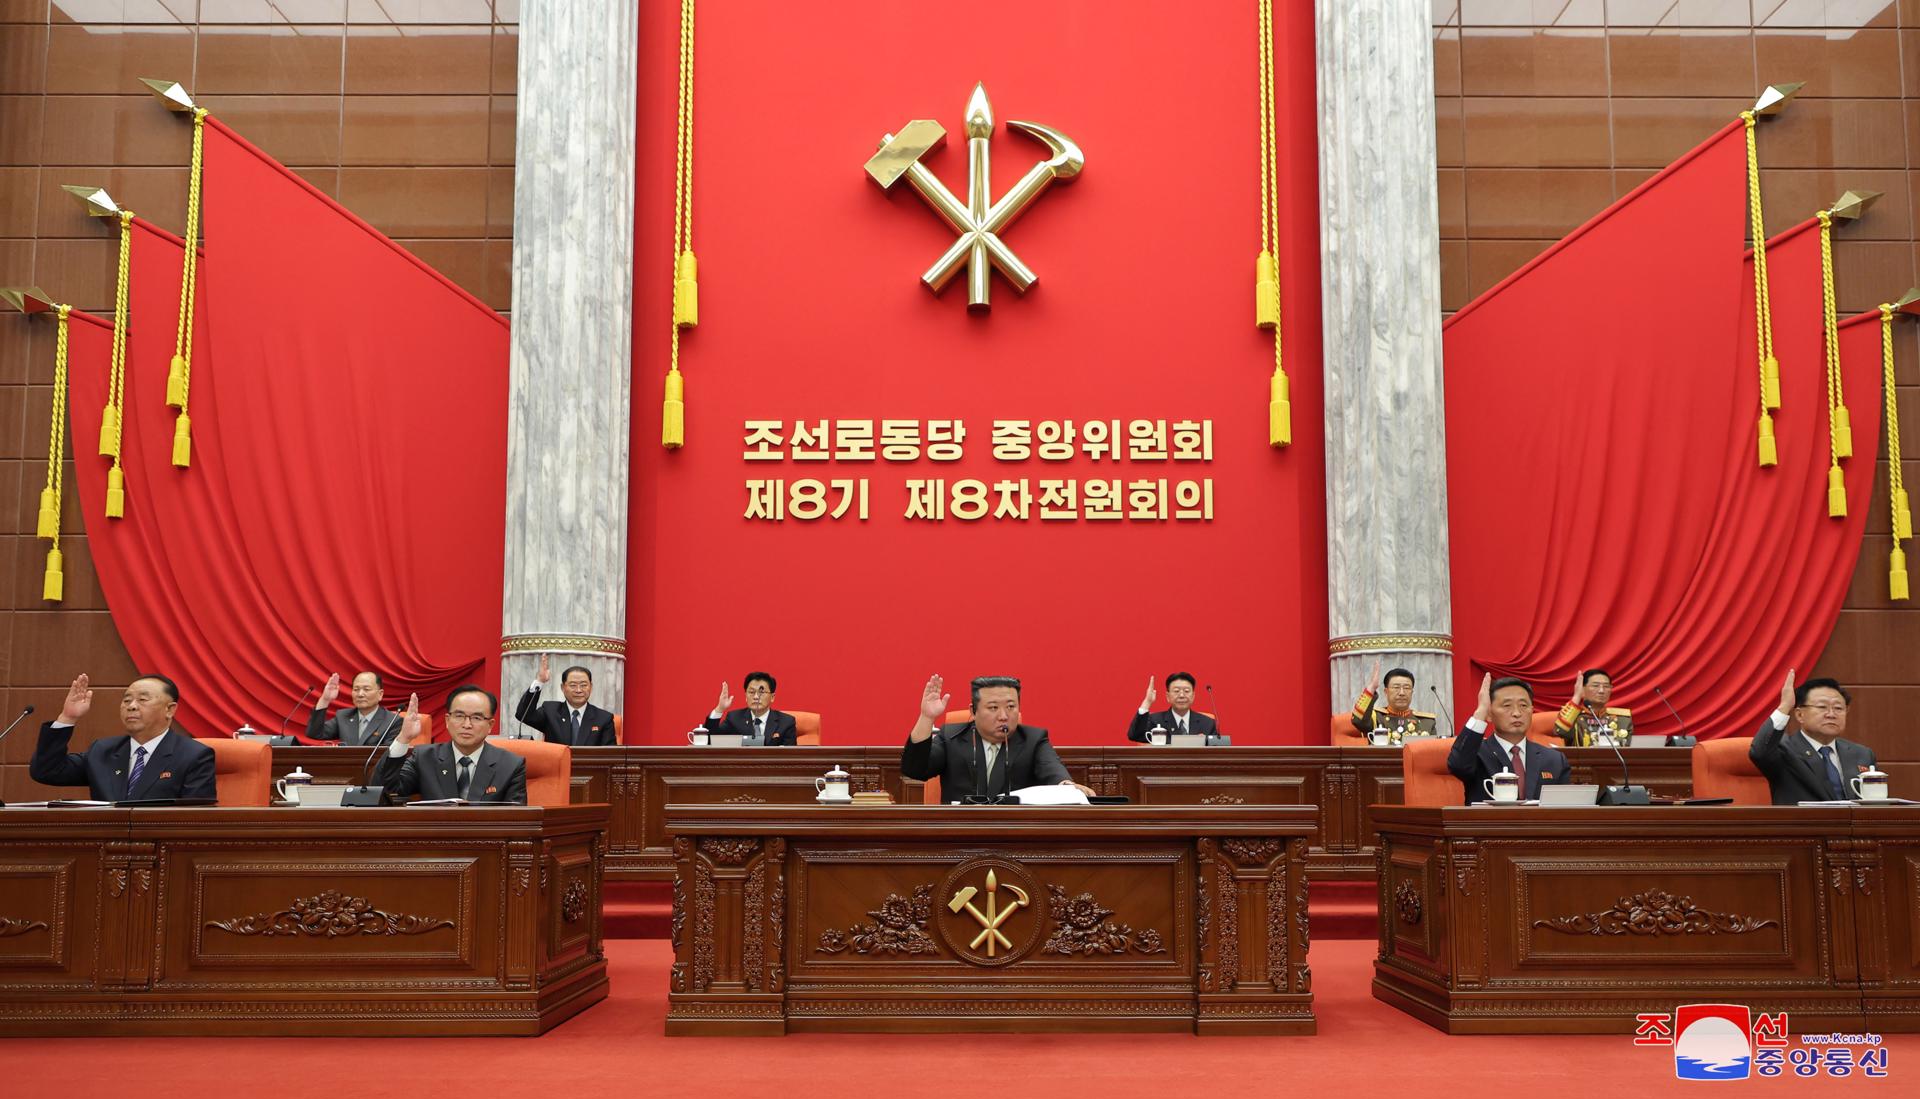 An undated photo released by the official North Korean Central News Agency (KCNA) shows North Korea leader Kim Jong Un (front C) raising his hand with other officials while attending an enlarged plenary meeting of 8th Workers' Party of Korea Central Committee at the office building of the WPK Central Committee in Pyongyang, North Korea (issued 19 June 2023). EFE-EPA/KCNA EDITORIAL USE ONLY